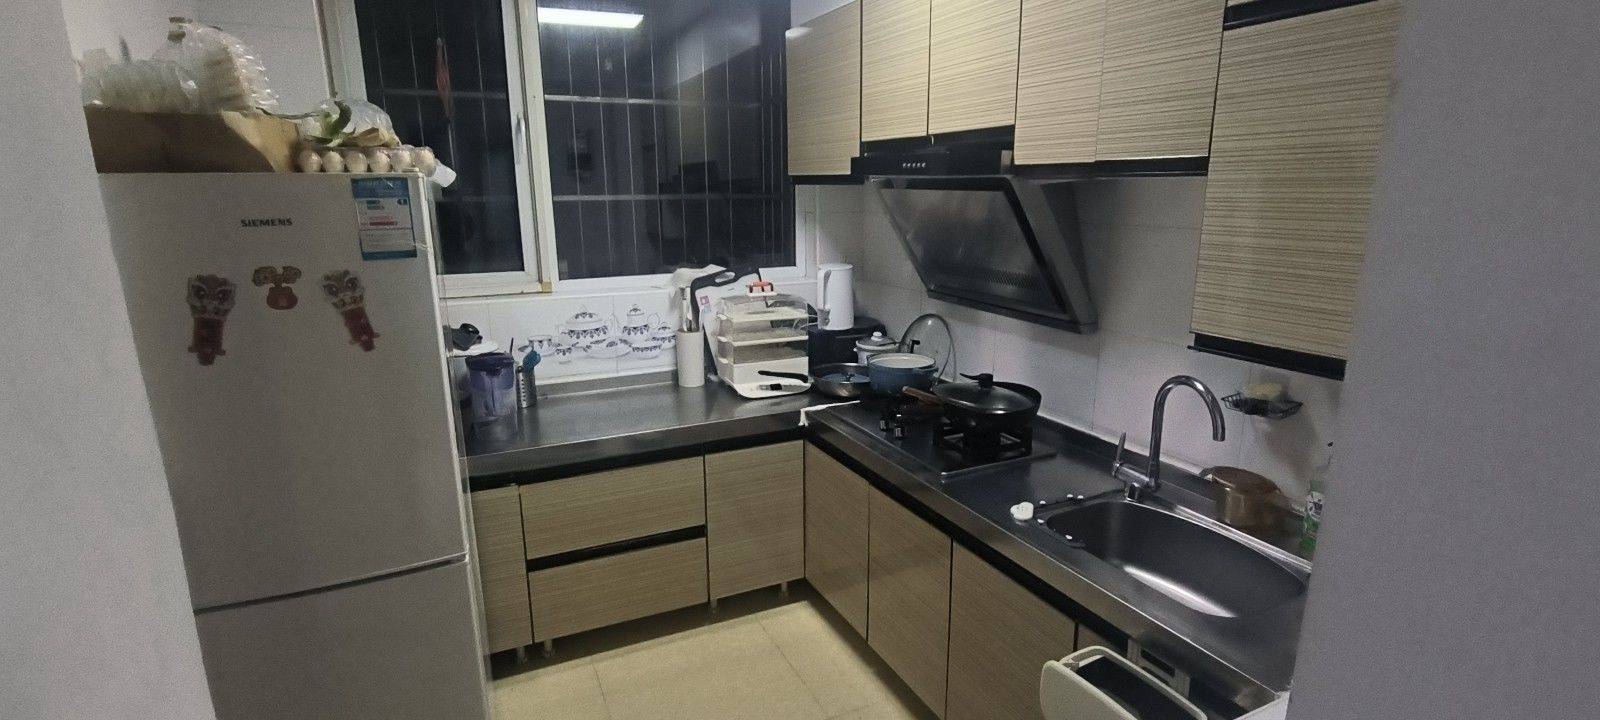 Beijing-Tongzhou-Cozy Home,Clean&Comfy,Chilled,LGBTQ Friendly,Pet Friendly